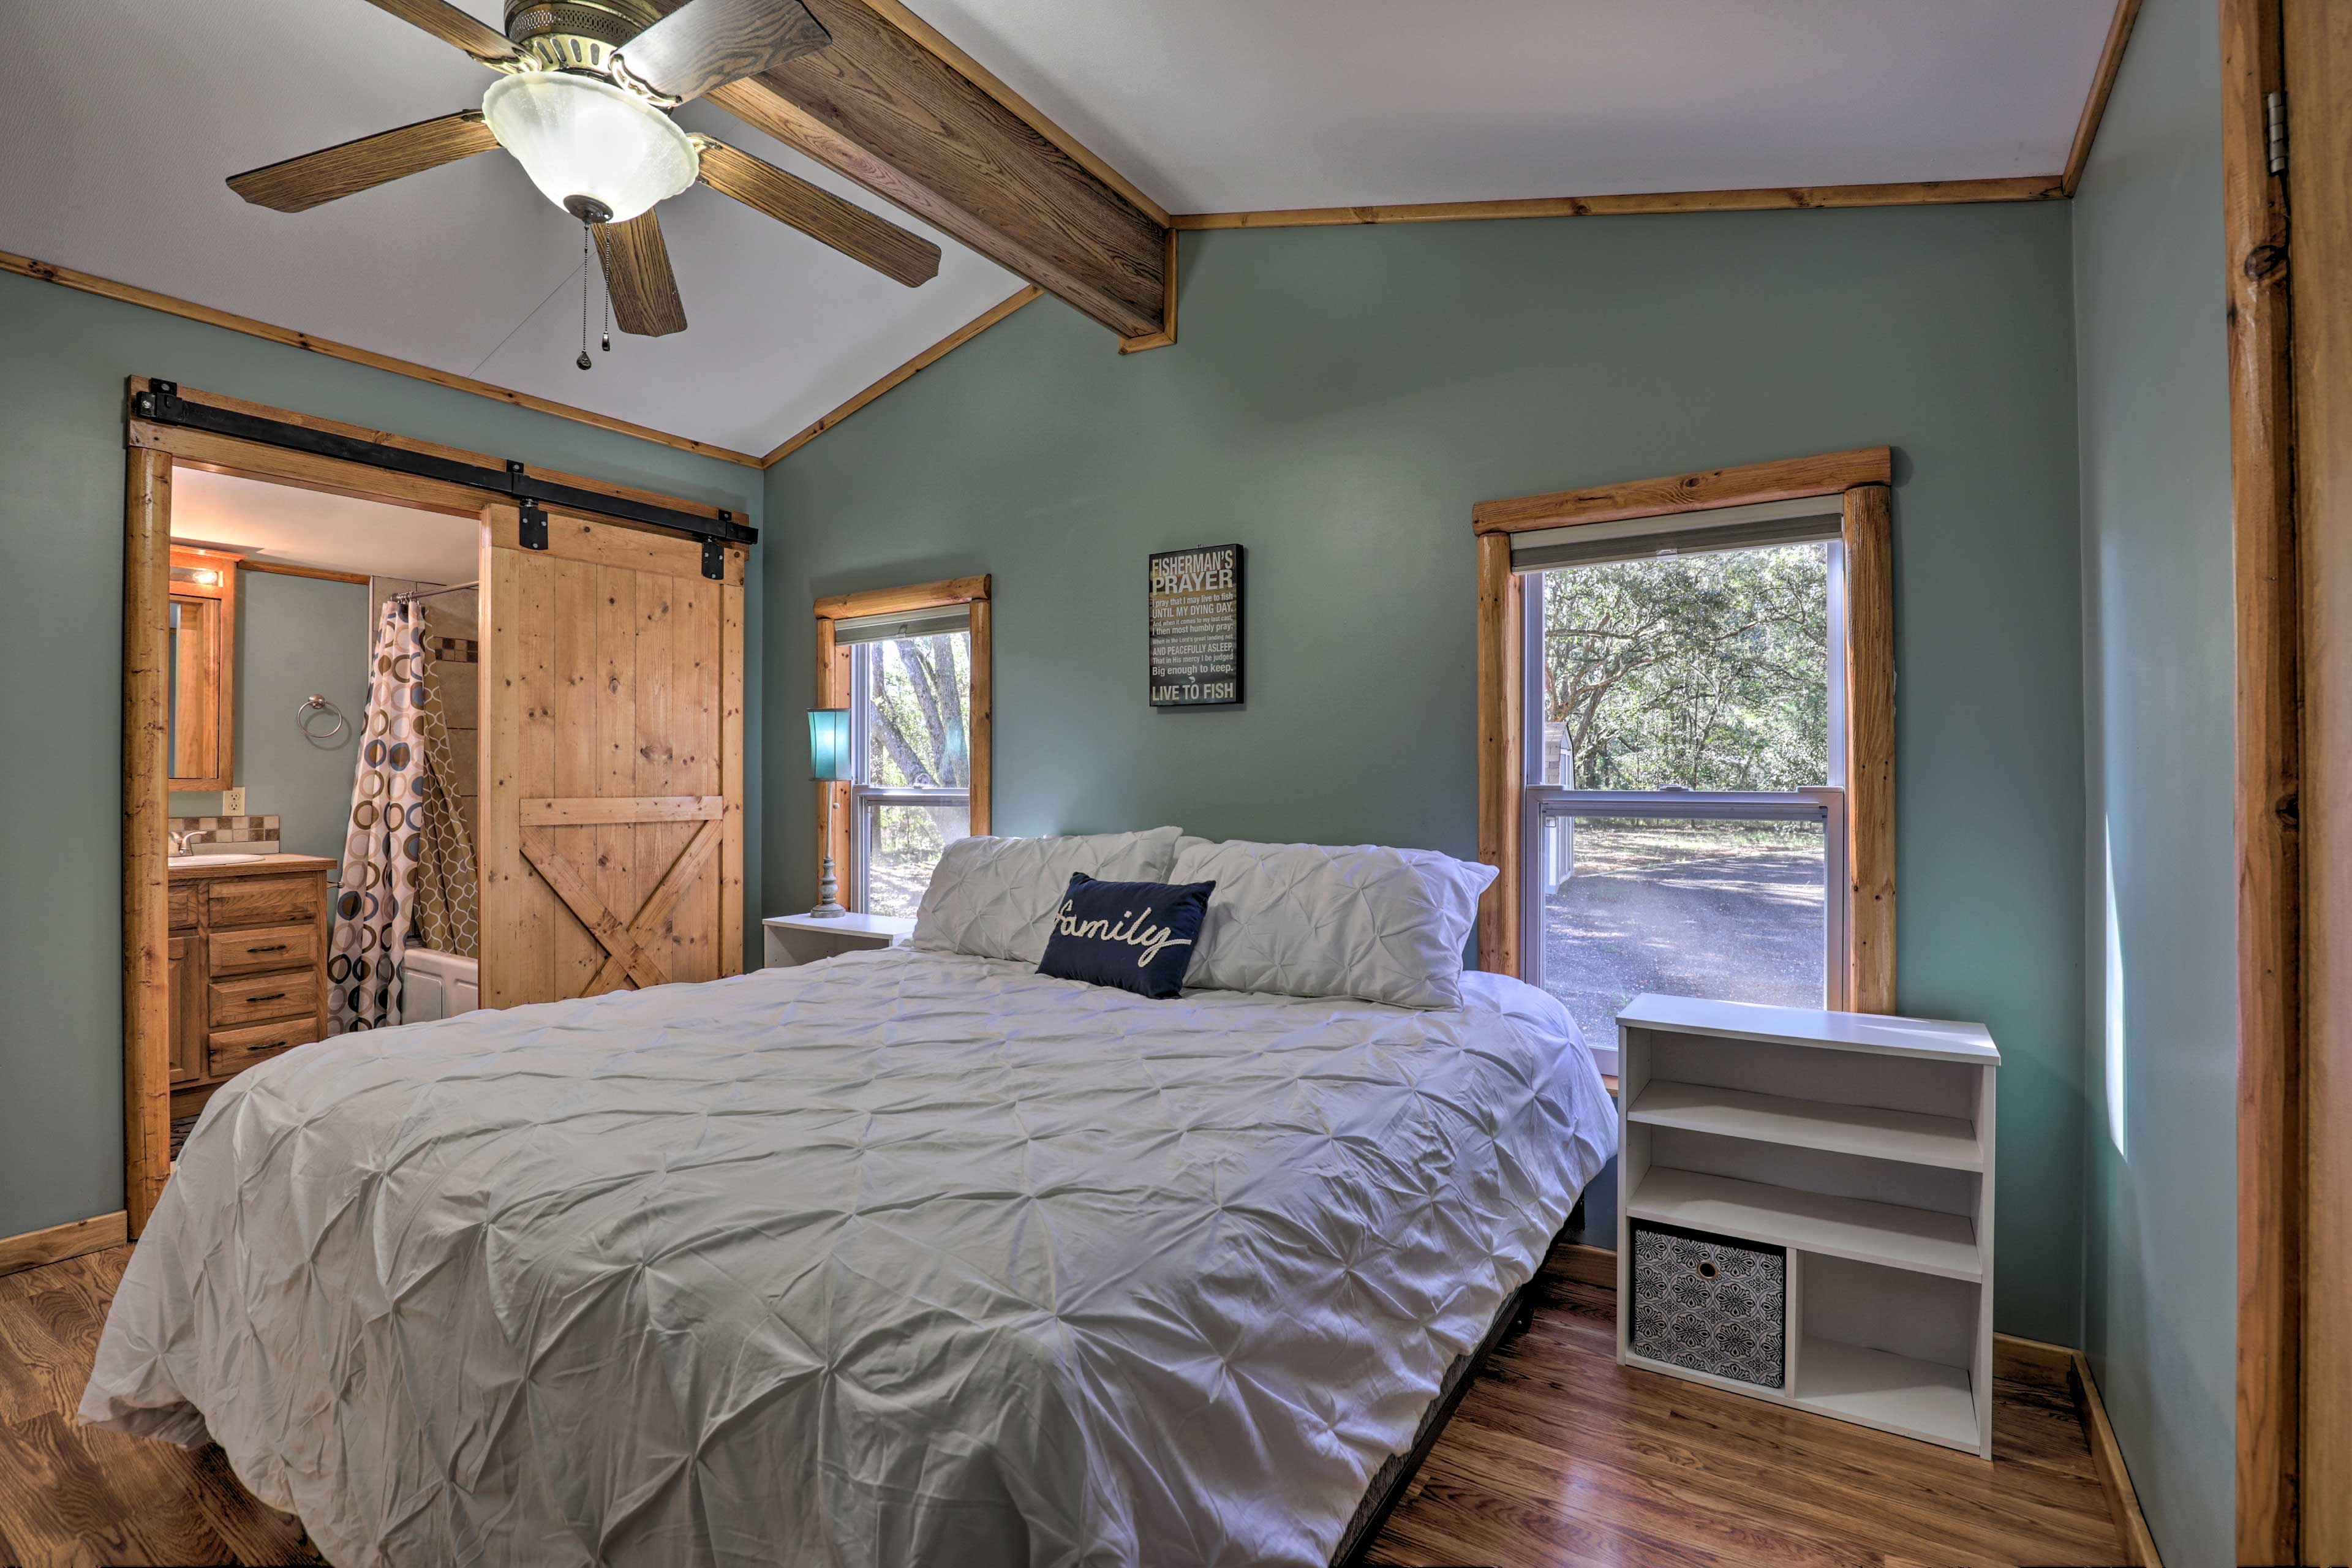 This master bedroom features a king-bed and an en-suite bathroom.